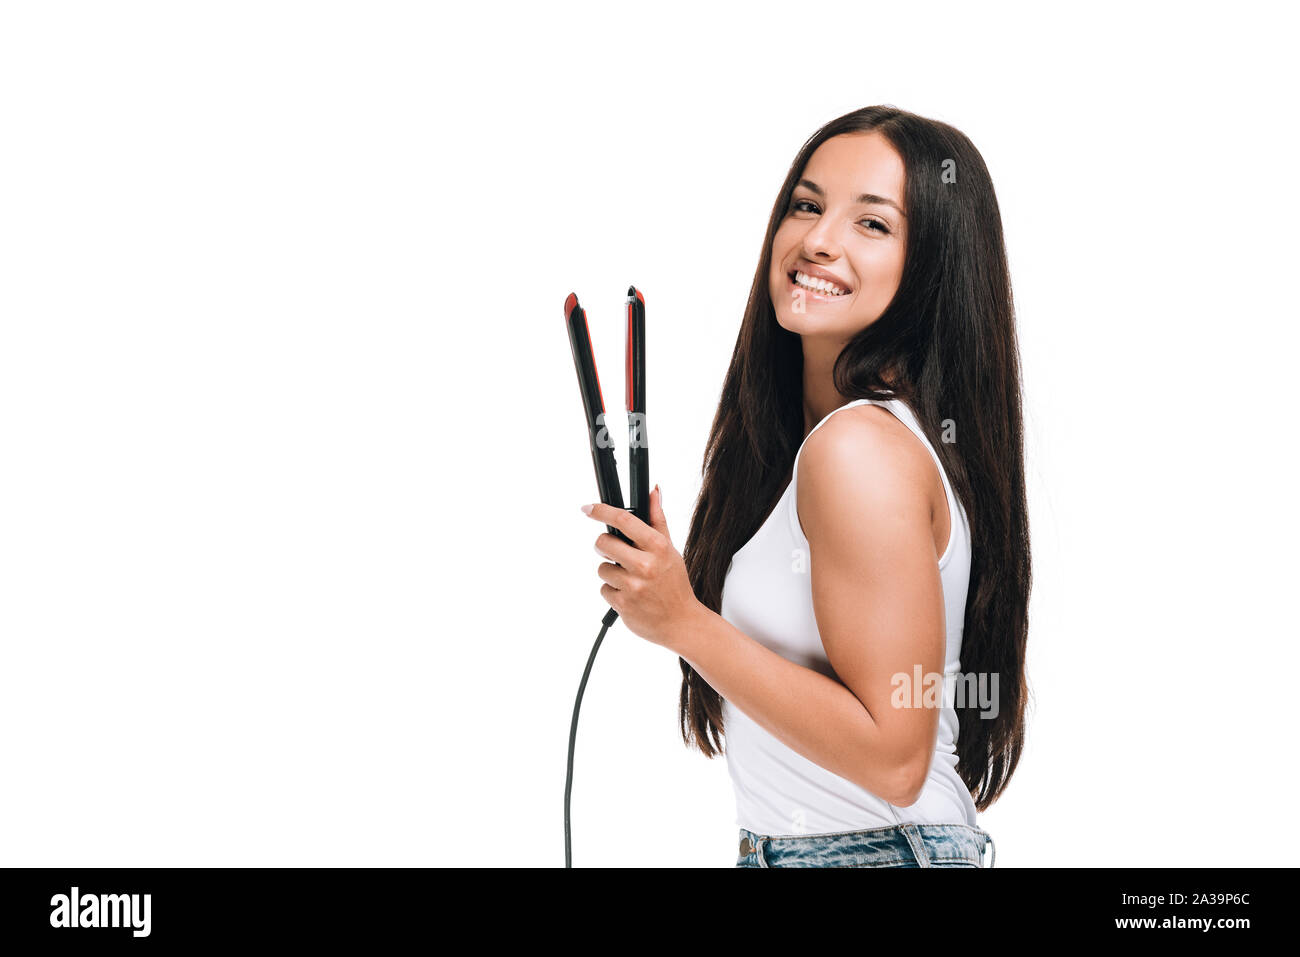 Woman holding hair straightener Cut Out Stock Images & Pictures - Alamy